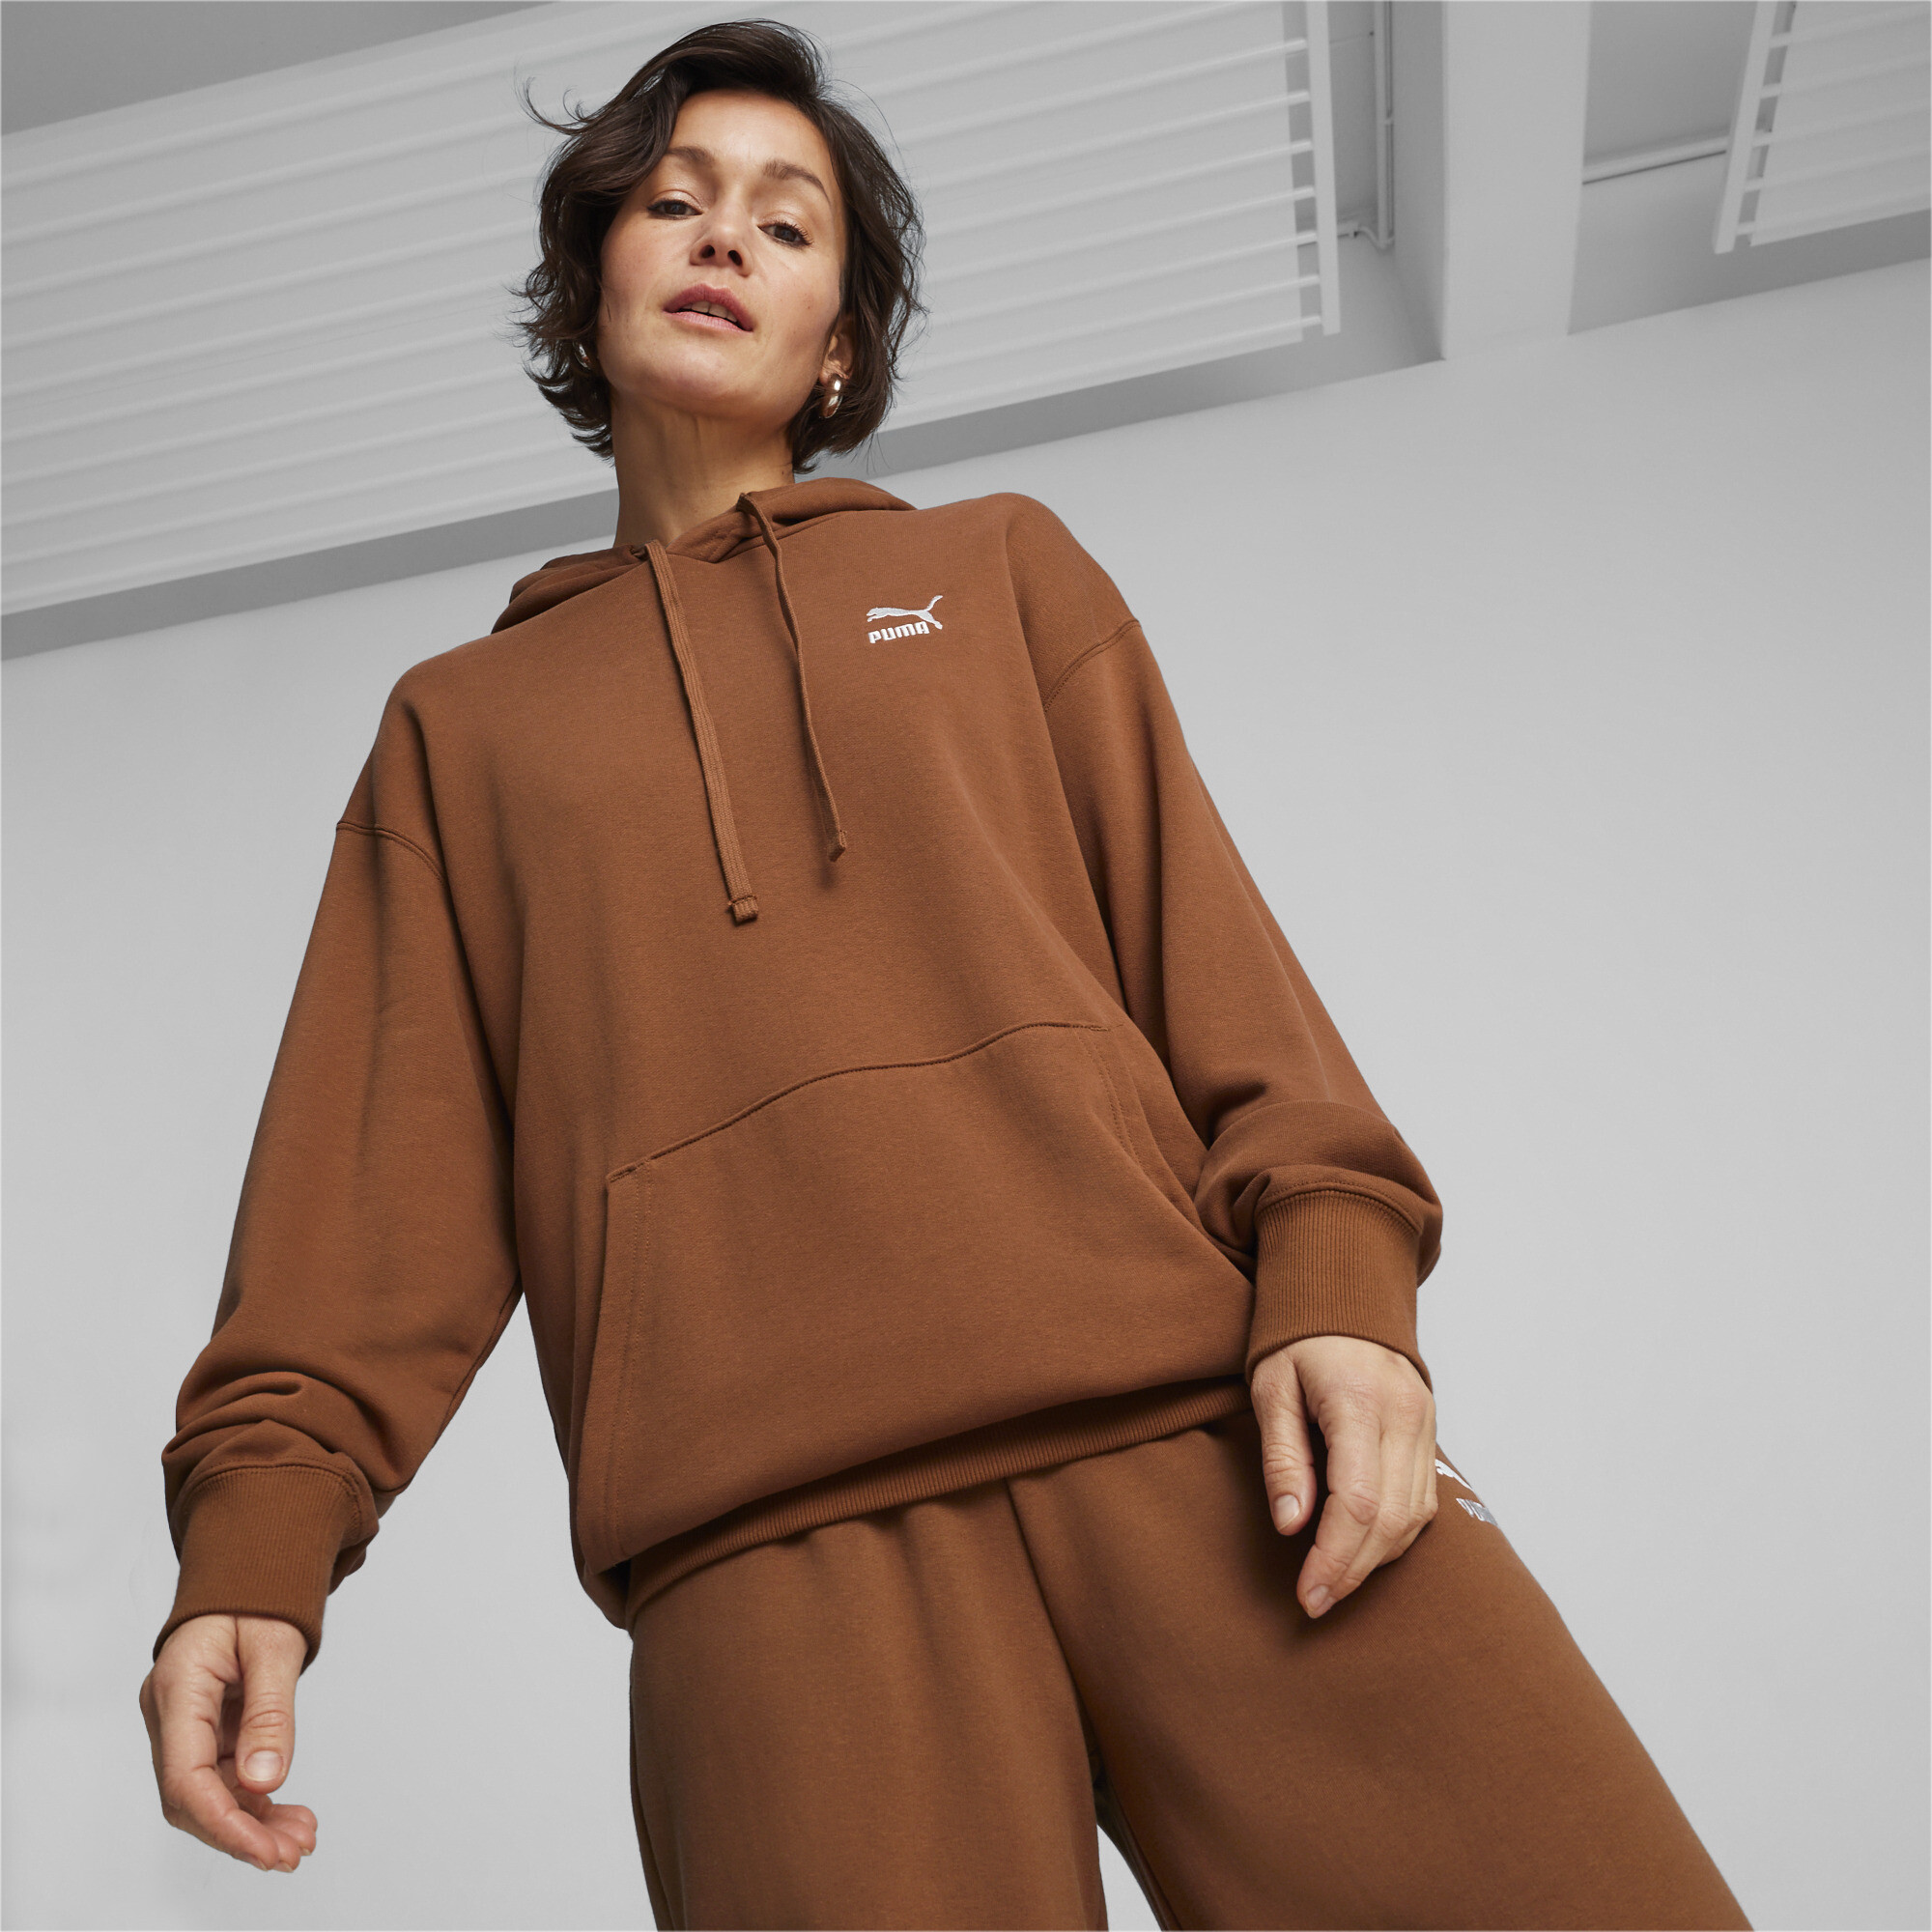 Puma BETTER CLASSICS Hoodie, Brown, Size XS, Clothing